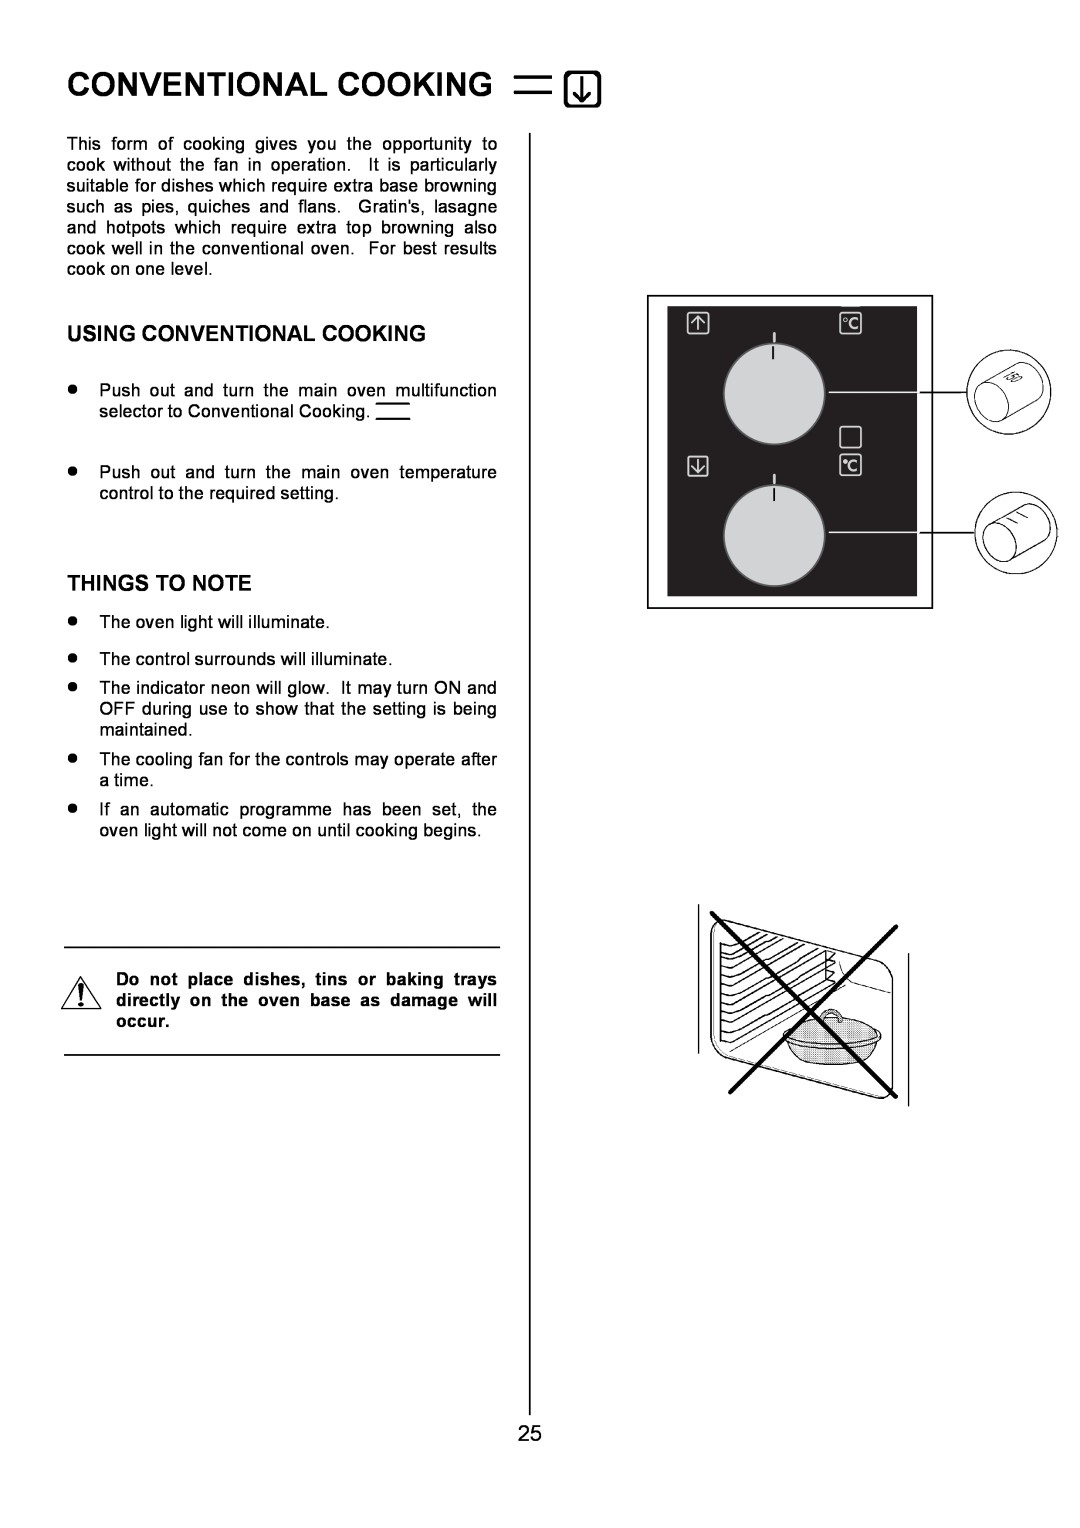 Electrolux U7101-4 operating instructions Using Conventional Cooking, Things To Note 